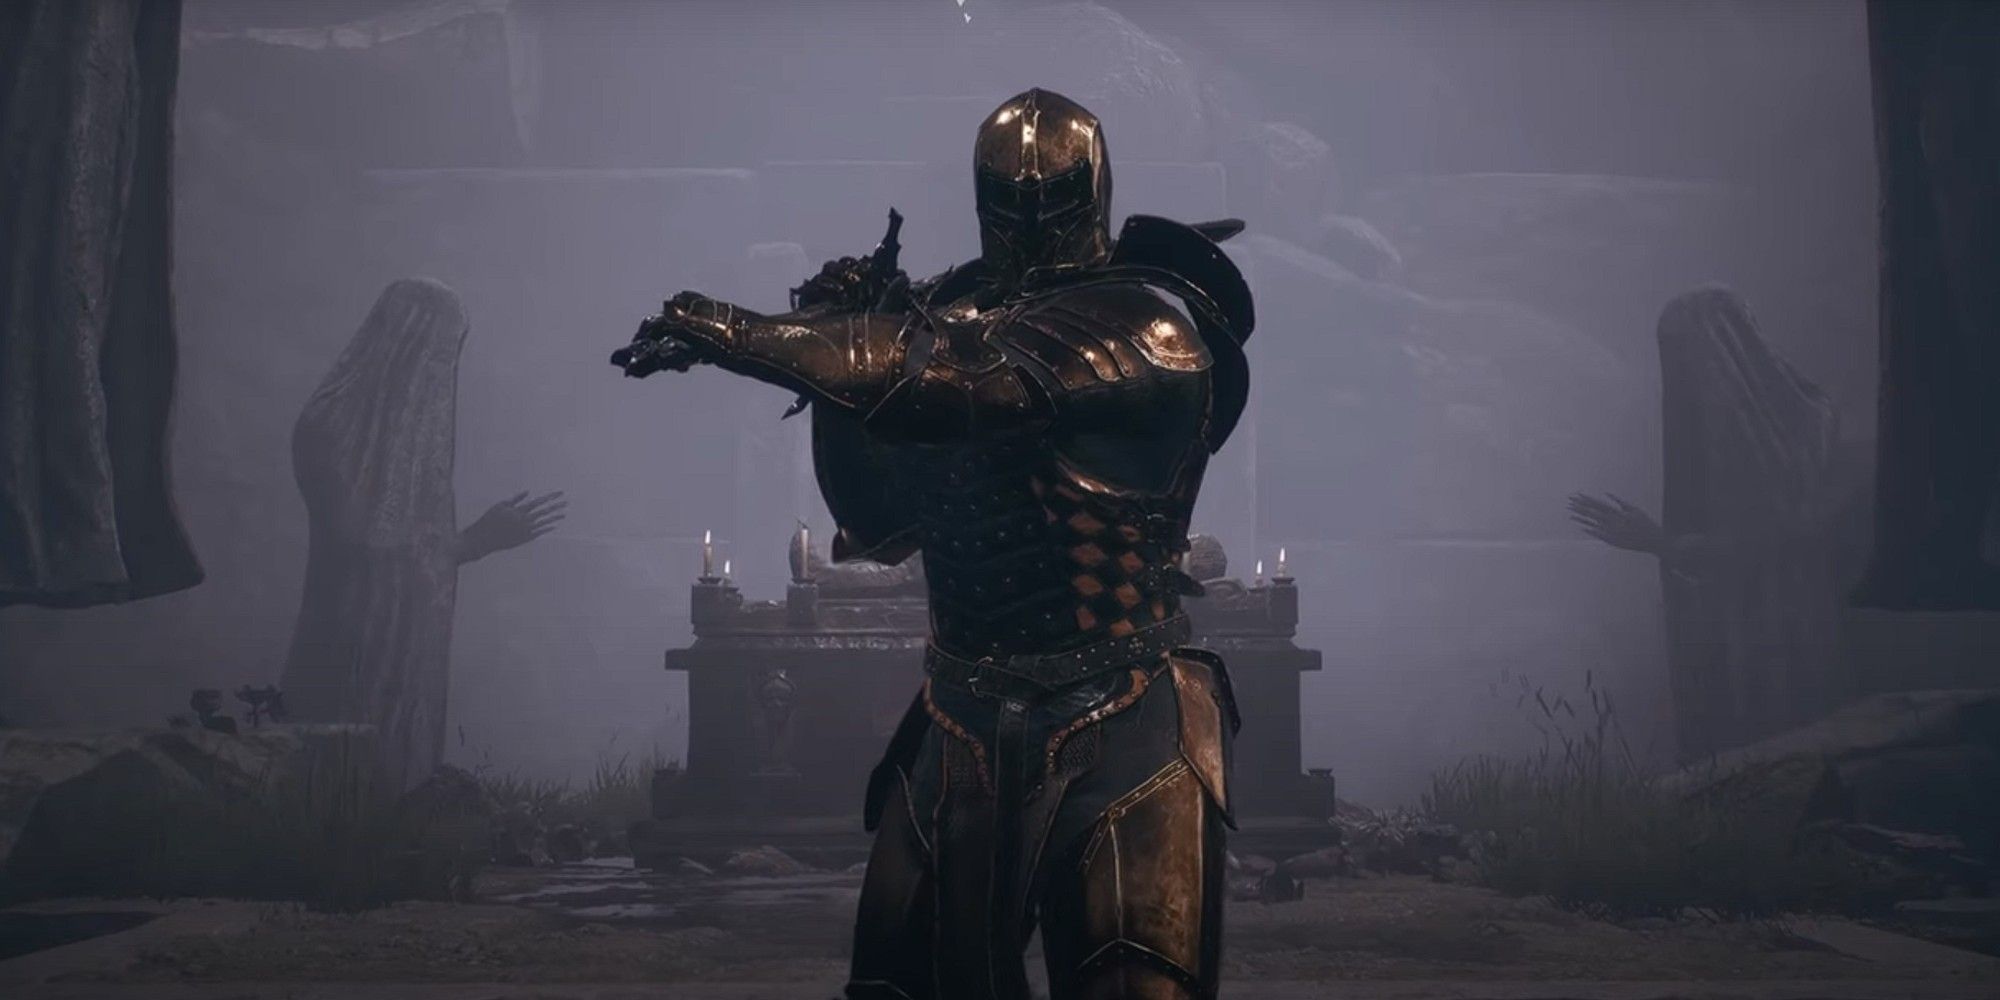 A giant suit of armor wielding a weapon in Mortal Shell